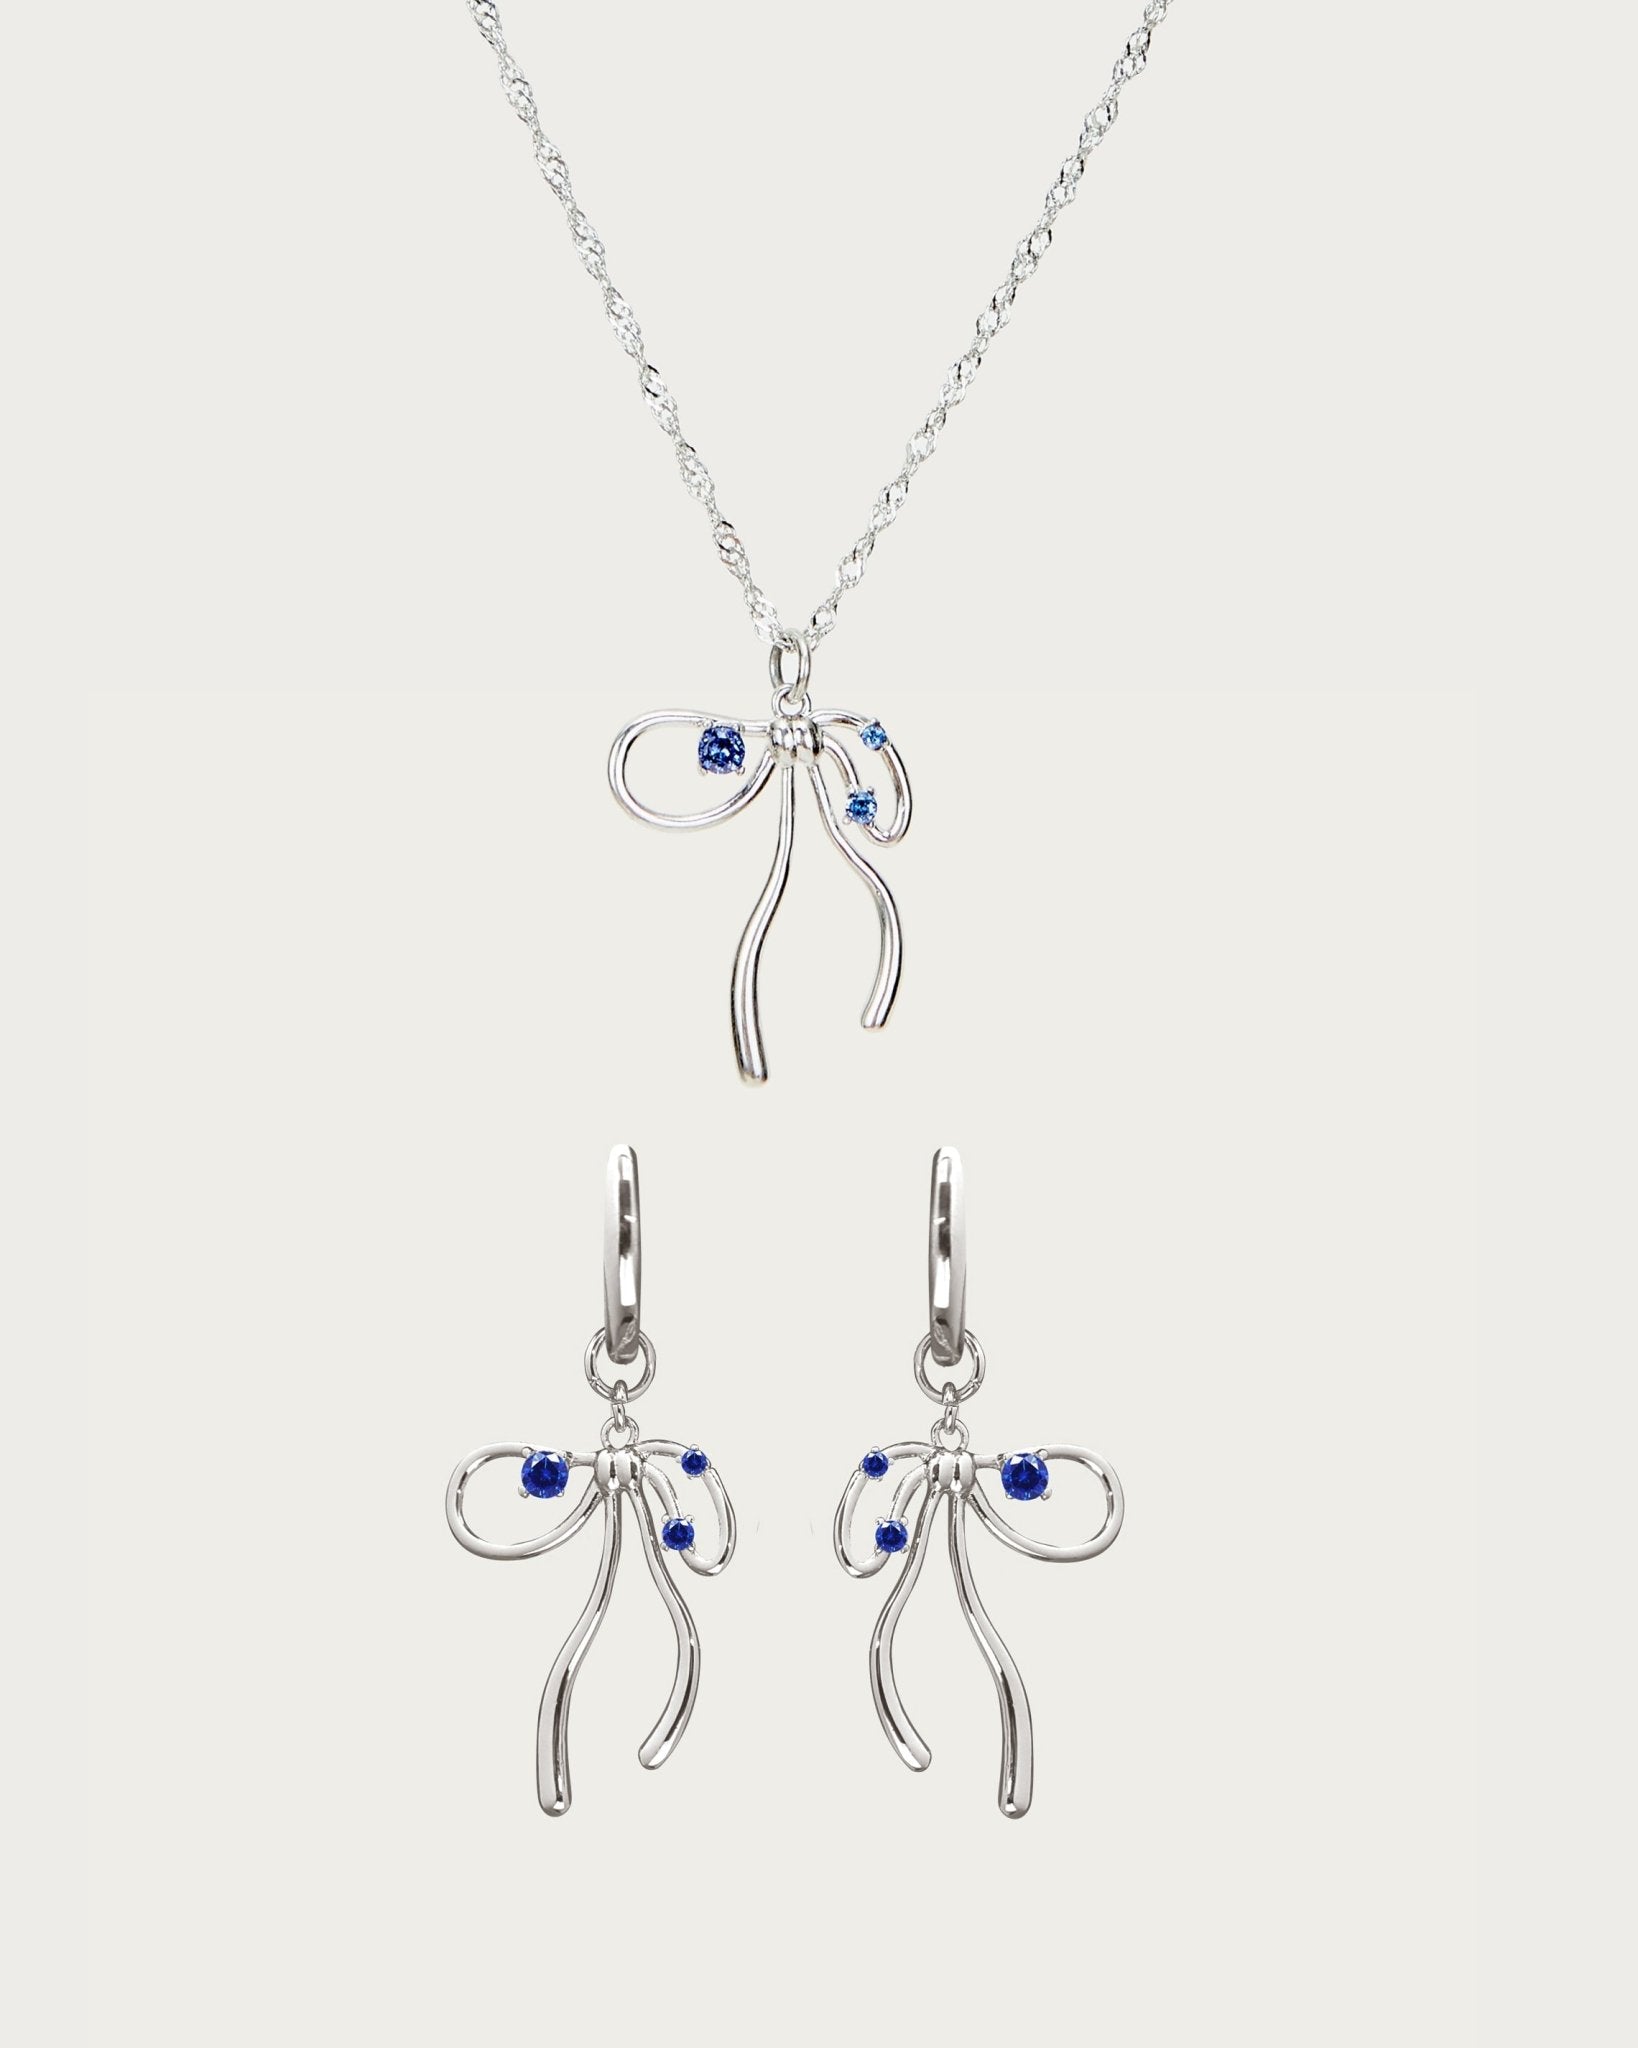 The Miffy Necklace & Earrings Set